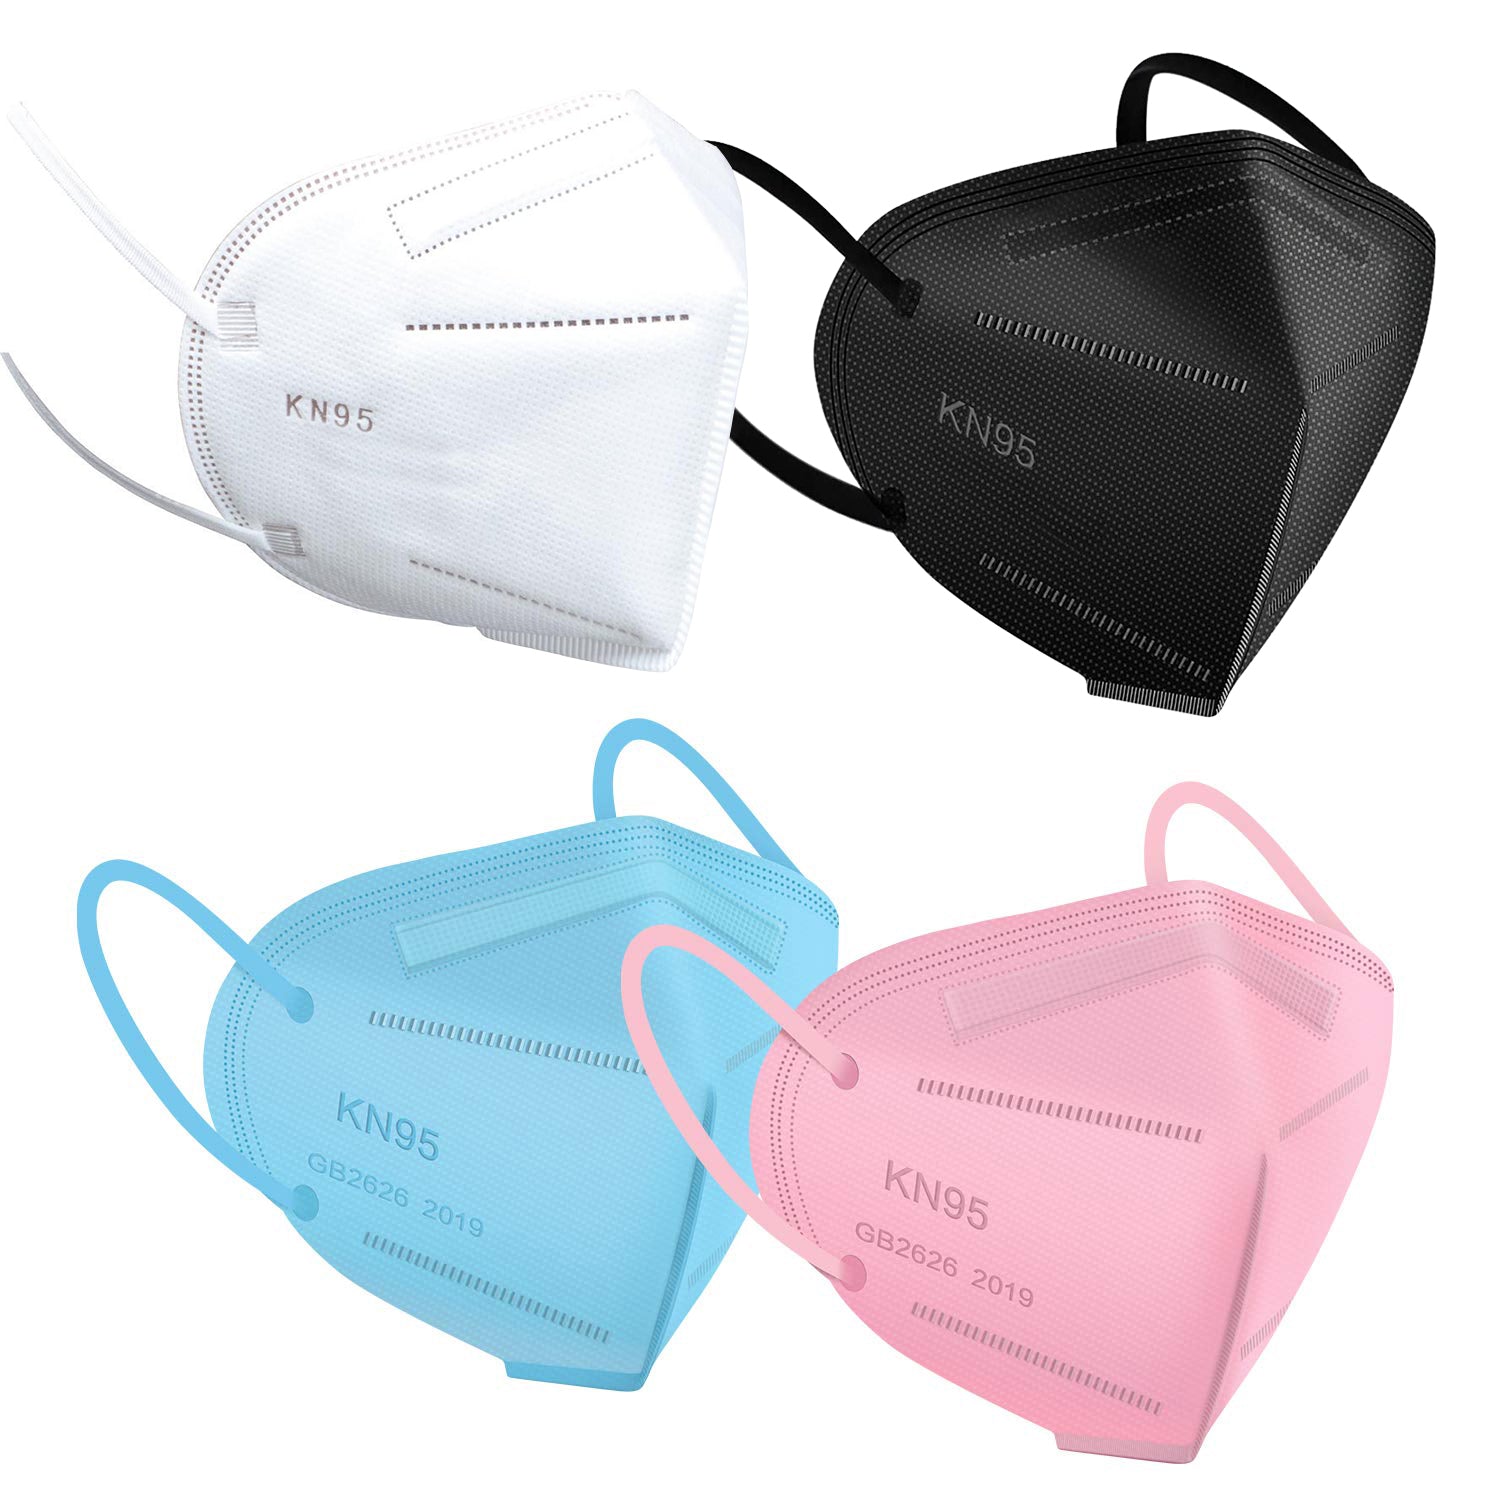 KN95 Face Masks - Breathable Mask with Comfortable Elastic Ear Loops, Filter Efficiency≥95%